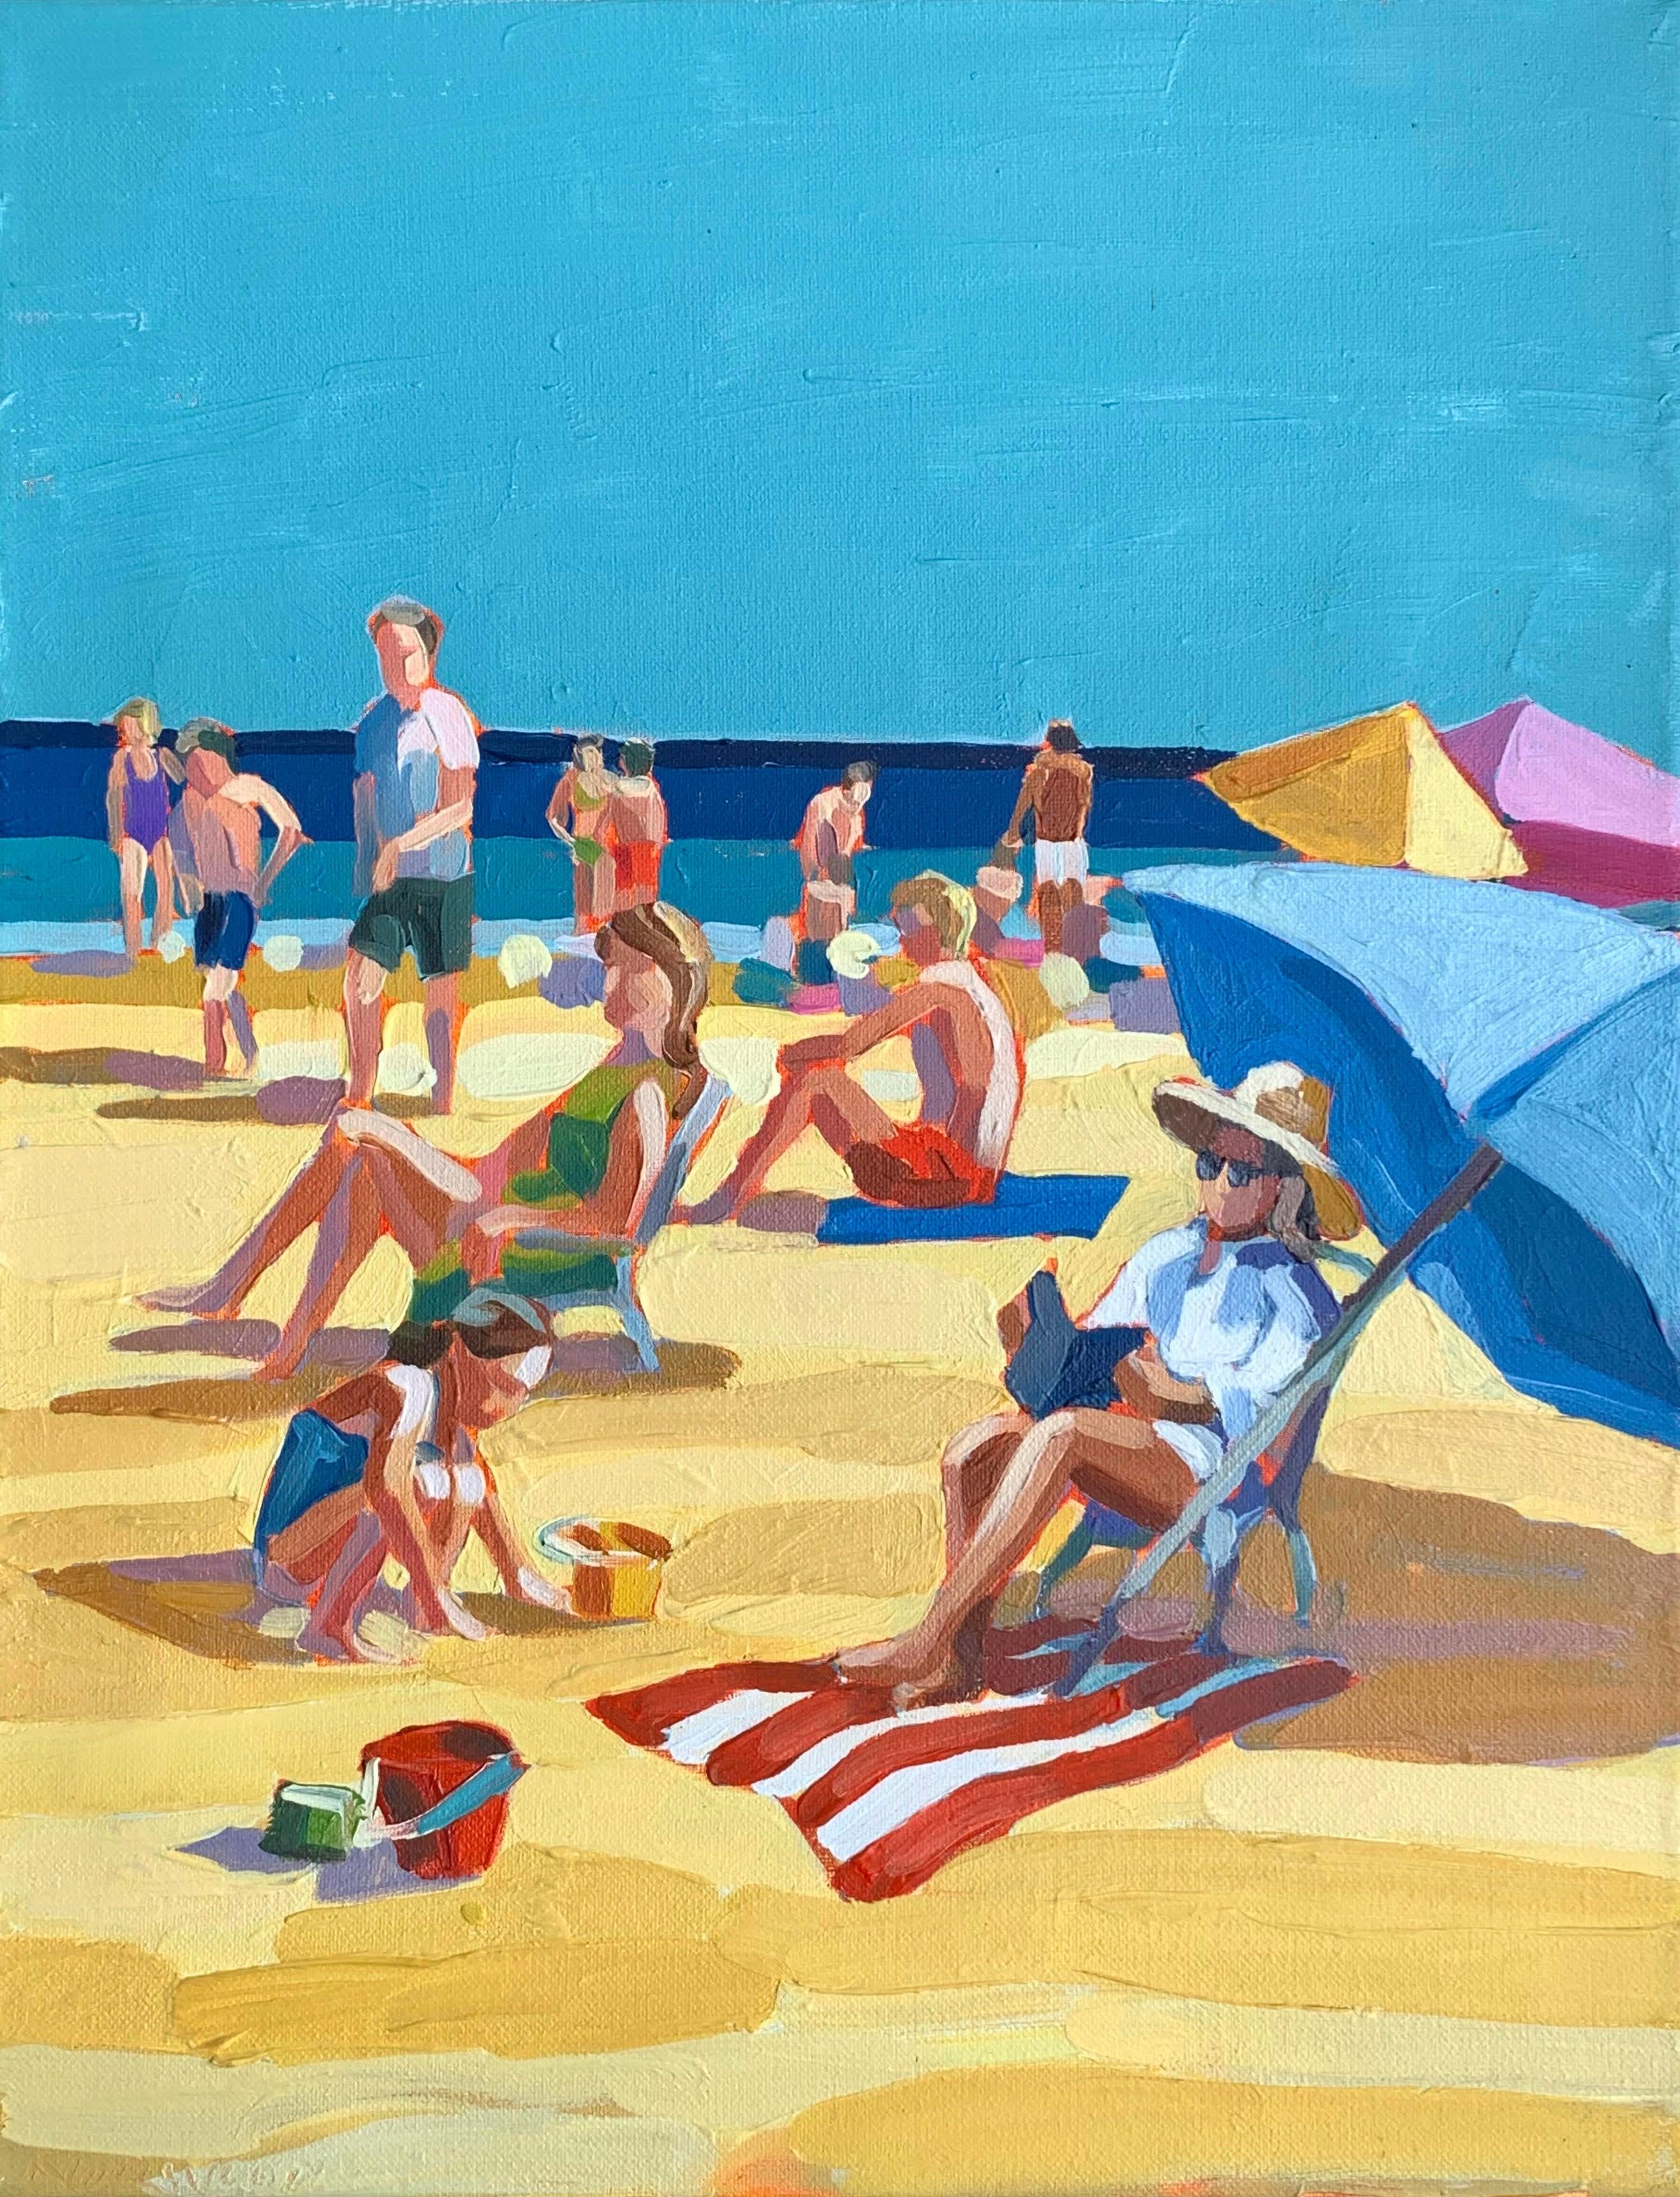 Paul Norwood Figurative Painting - "Beach Read" acrylic painting of colorful beach scene with blue sky